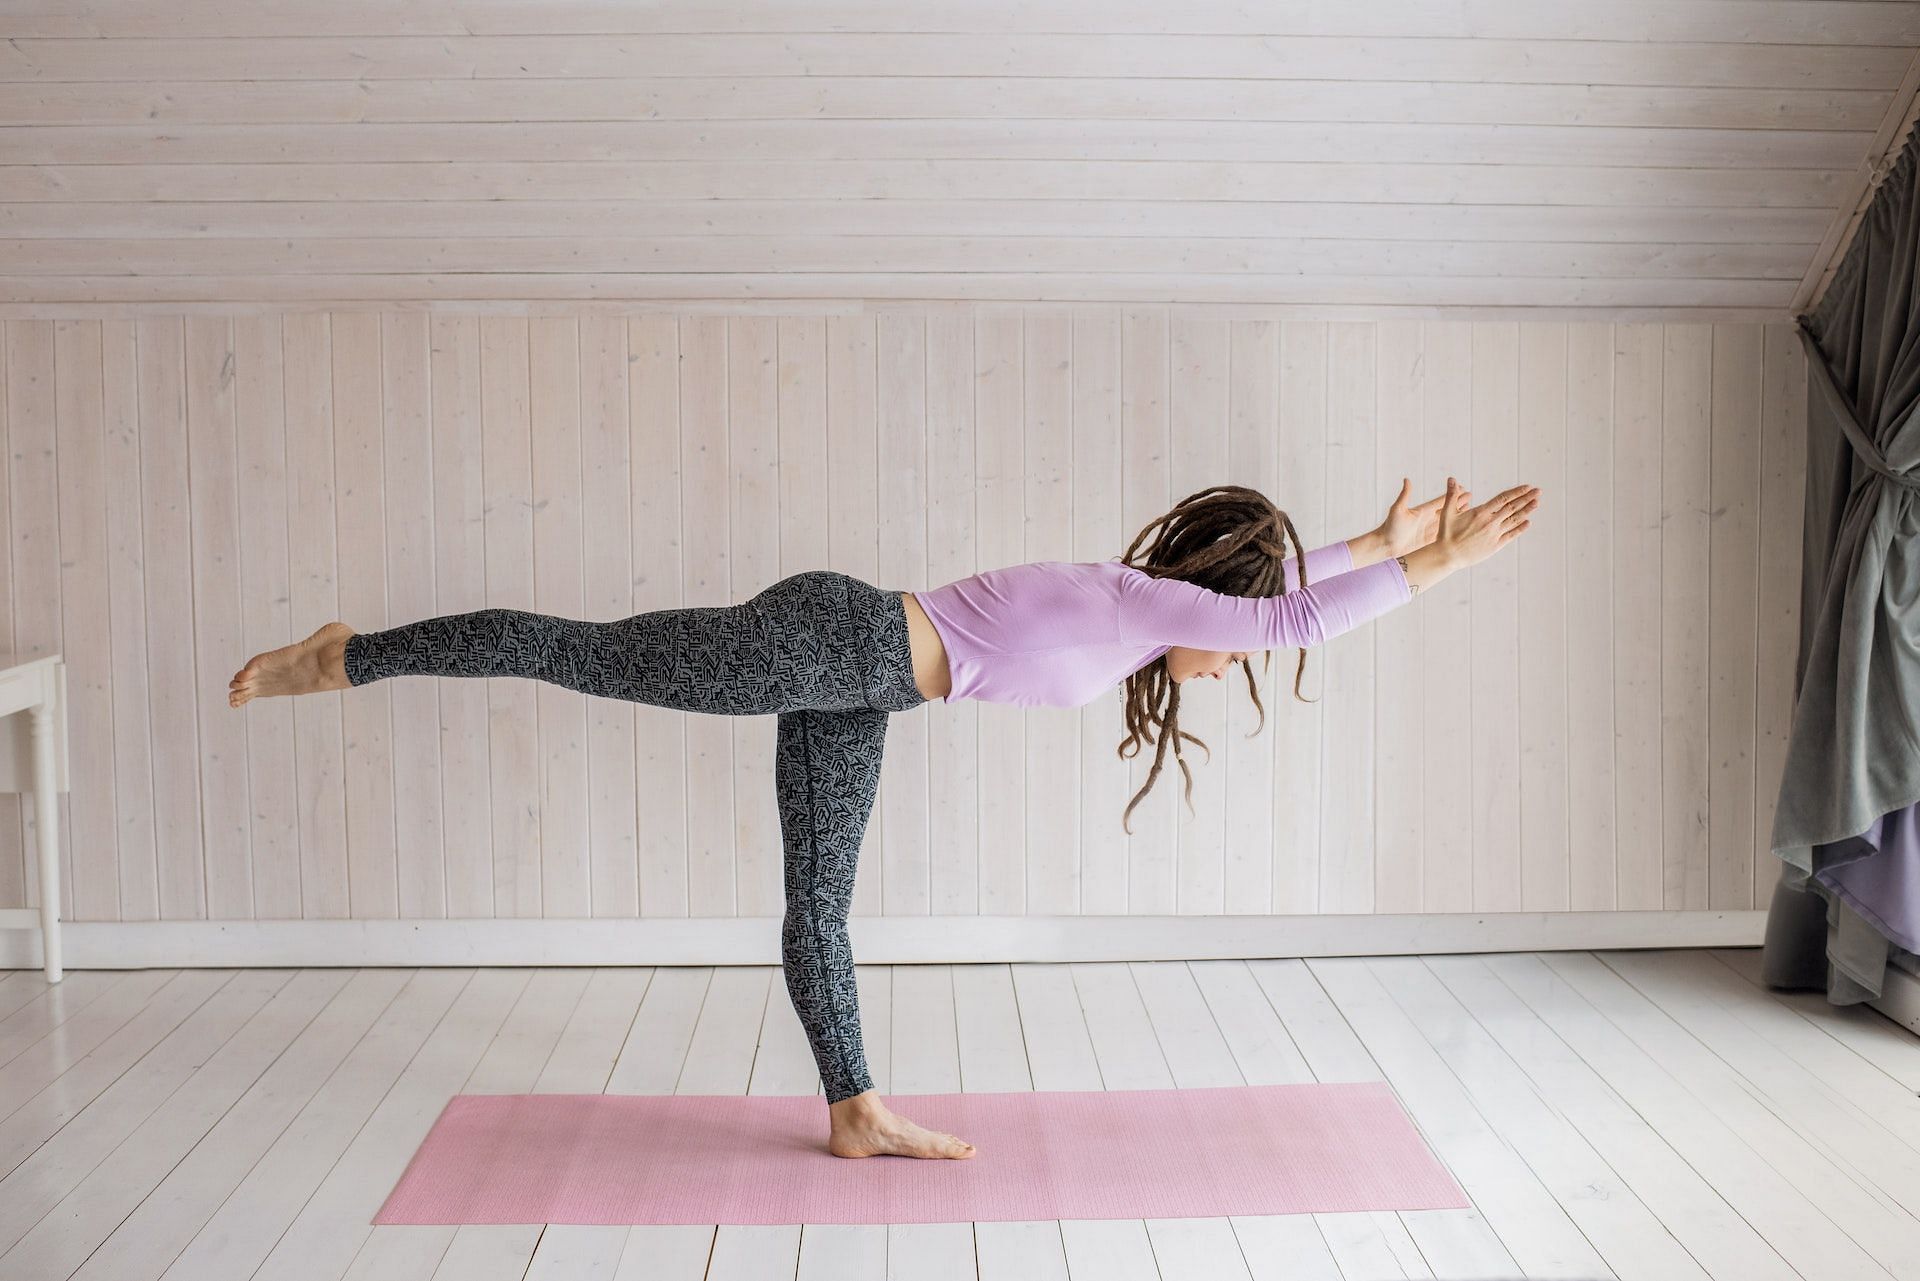 6 Yoga Poses for Aging Well | livestrong